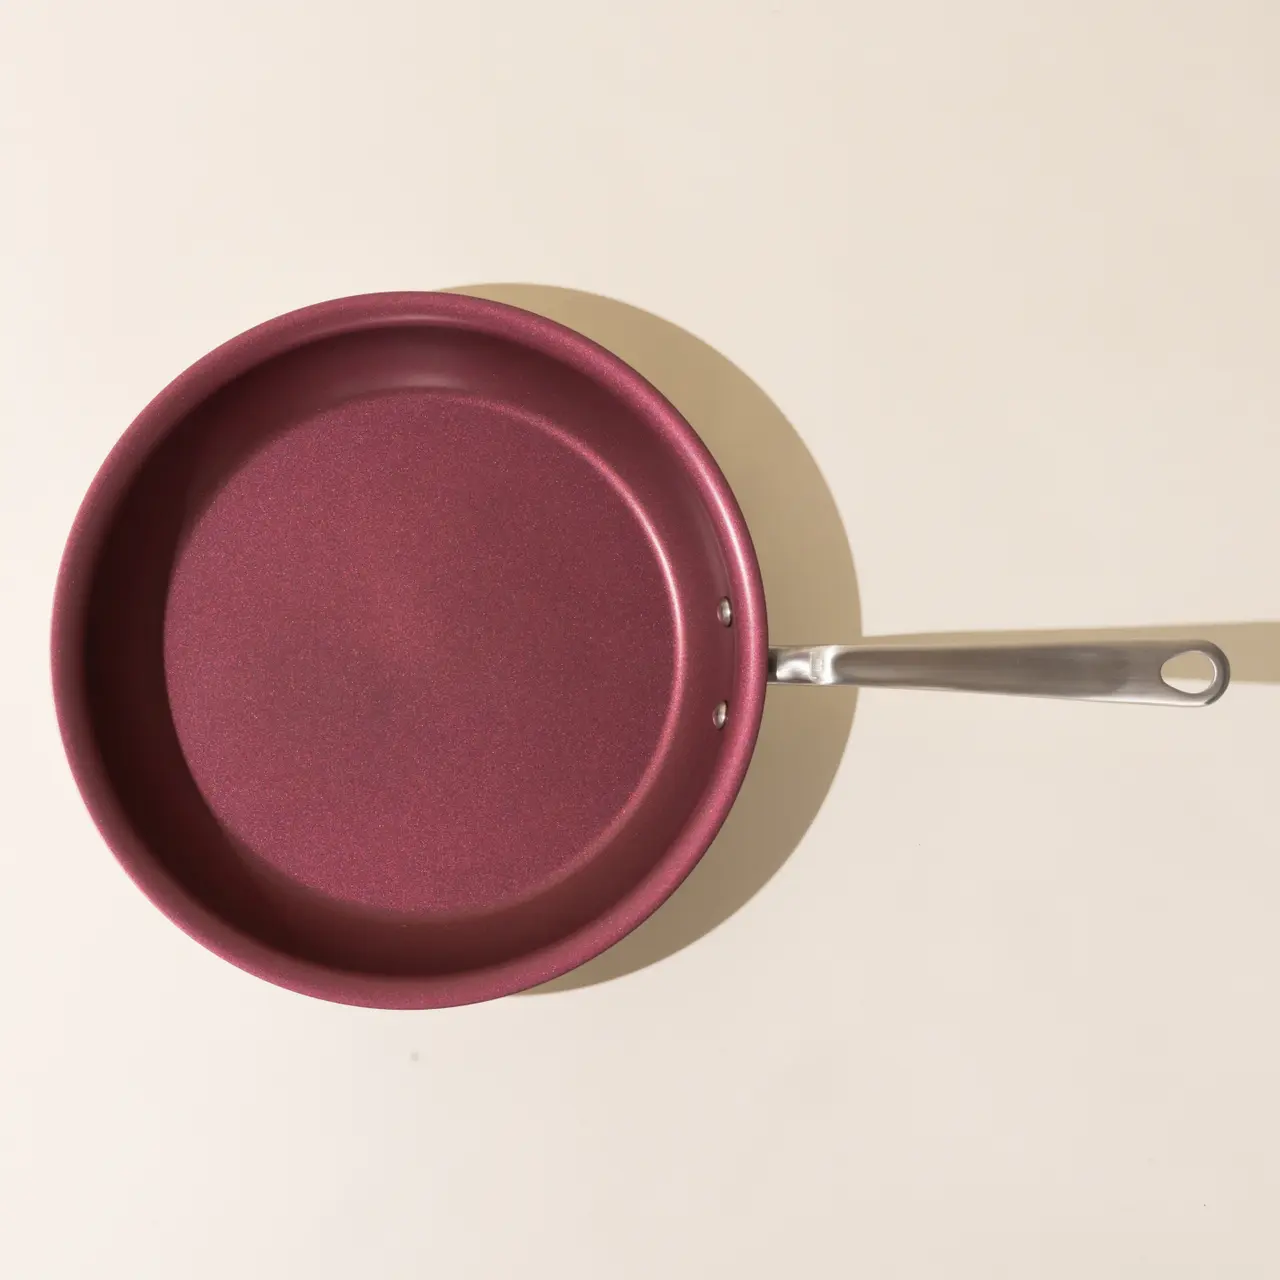 A new maroon non-stick frying pan with a stainless steel handle, photographed from above on a beige surface.